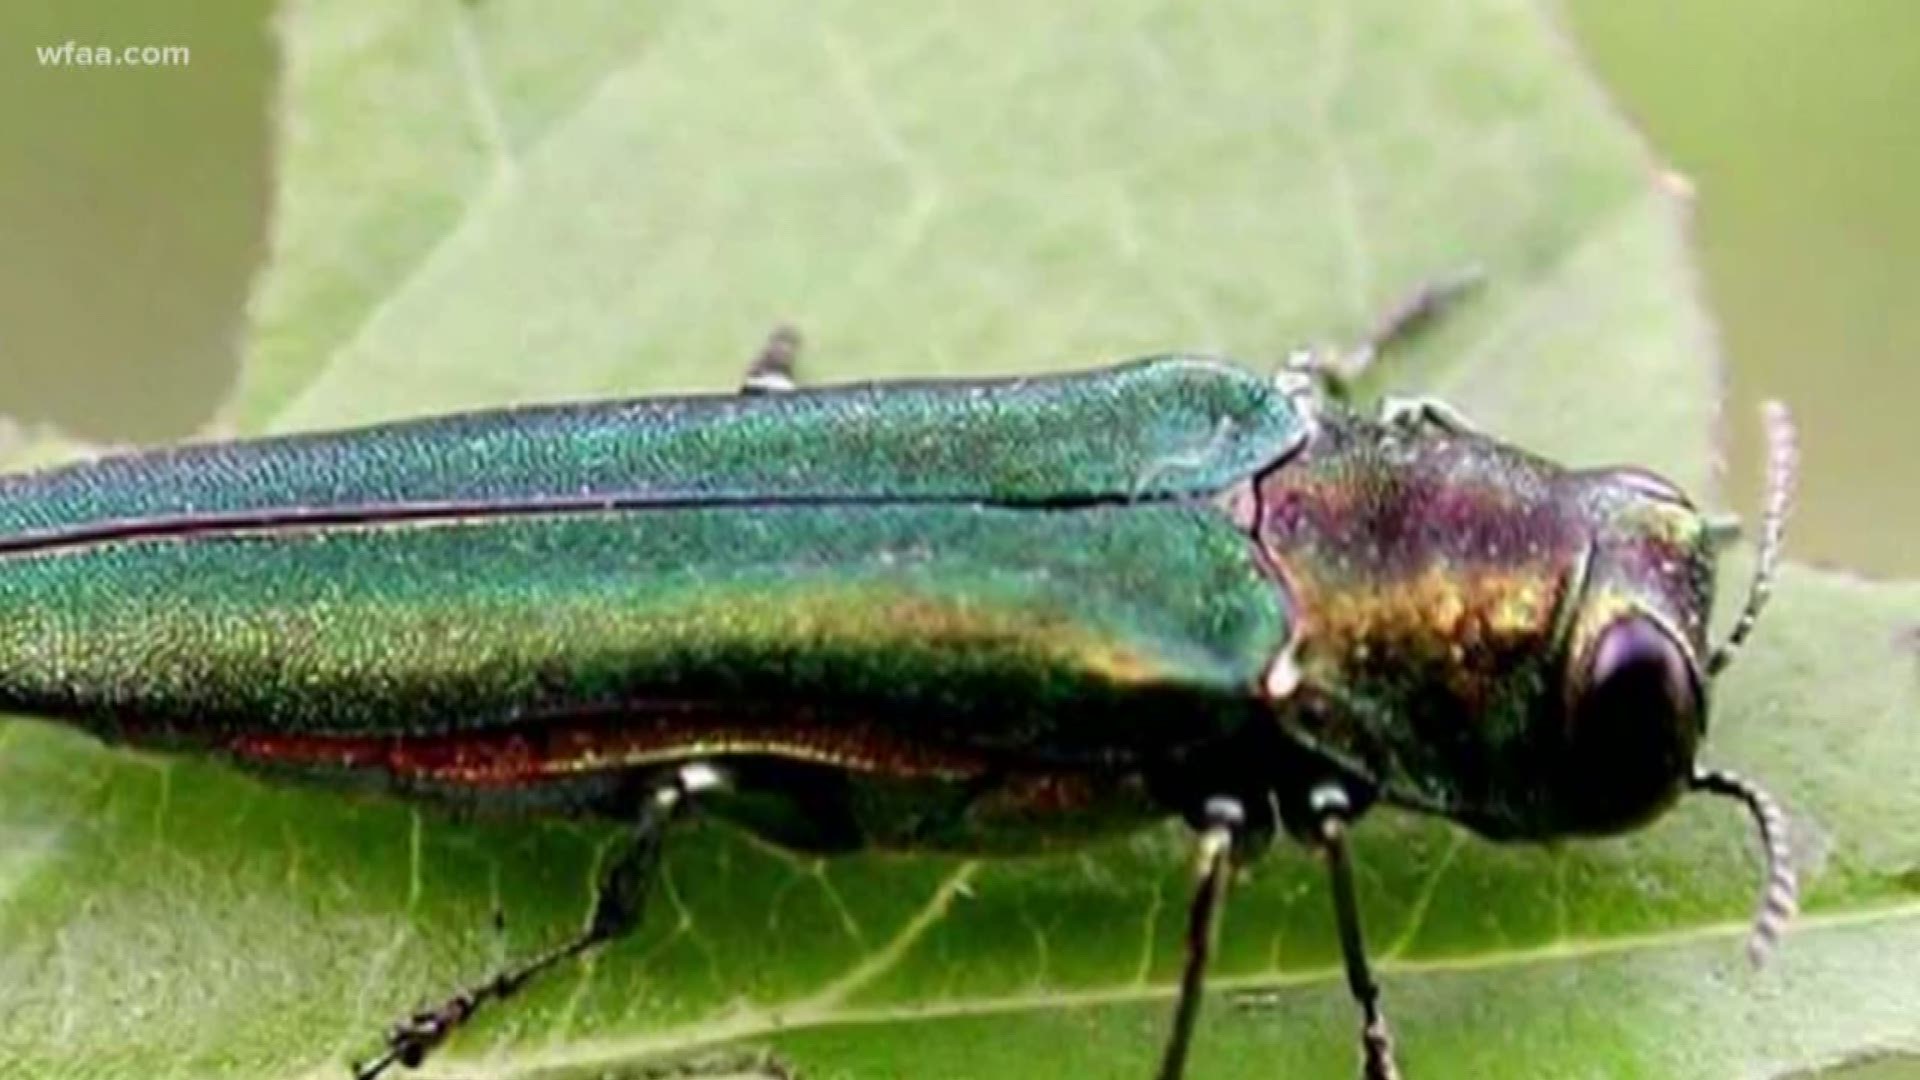 The Emerald Ash Borer has decimated ash trees in the Midwest for years. The beetle was discovered in Fort Worth in 2018.